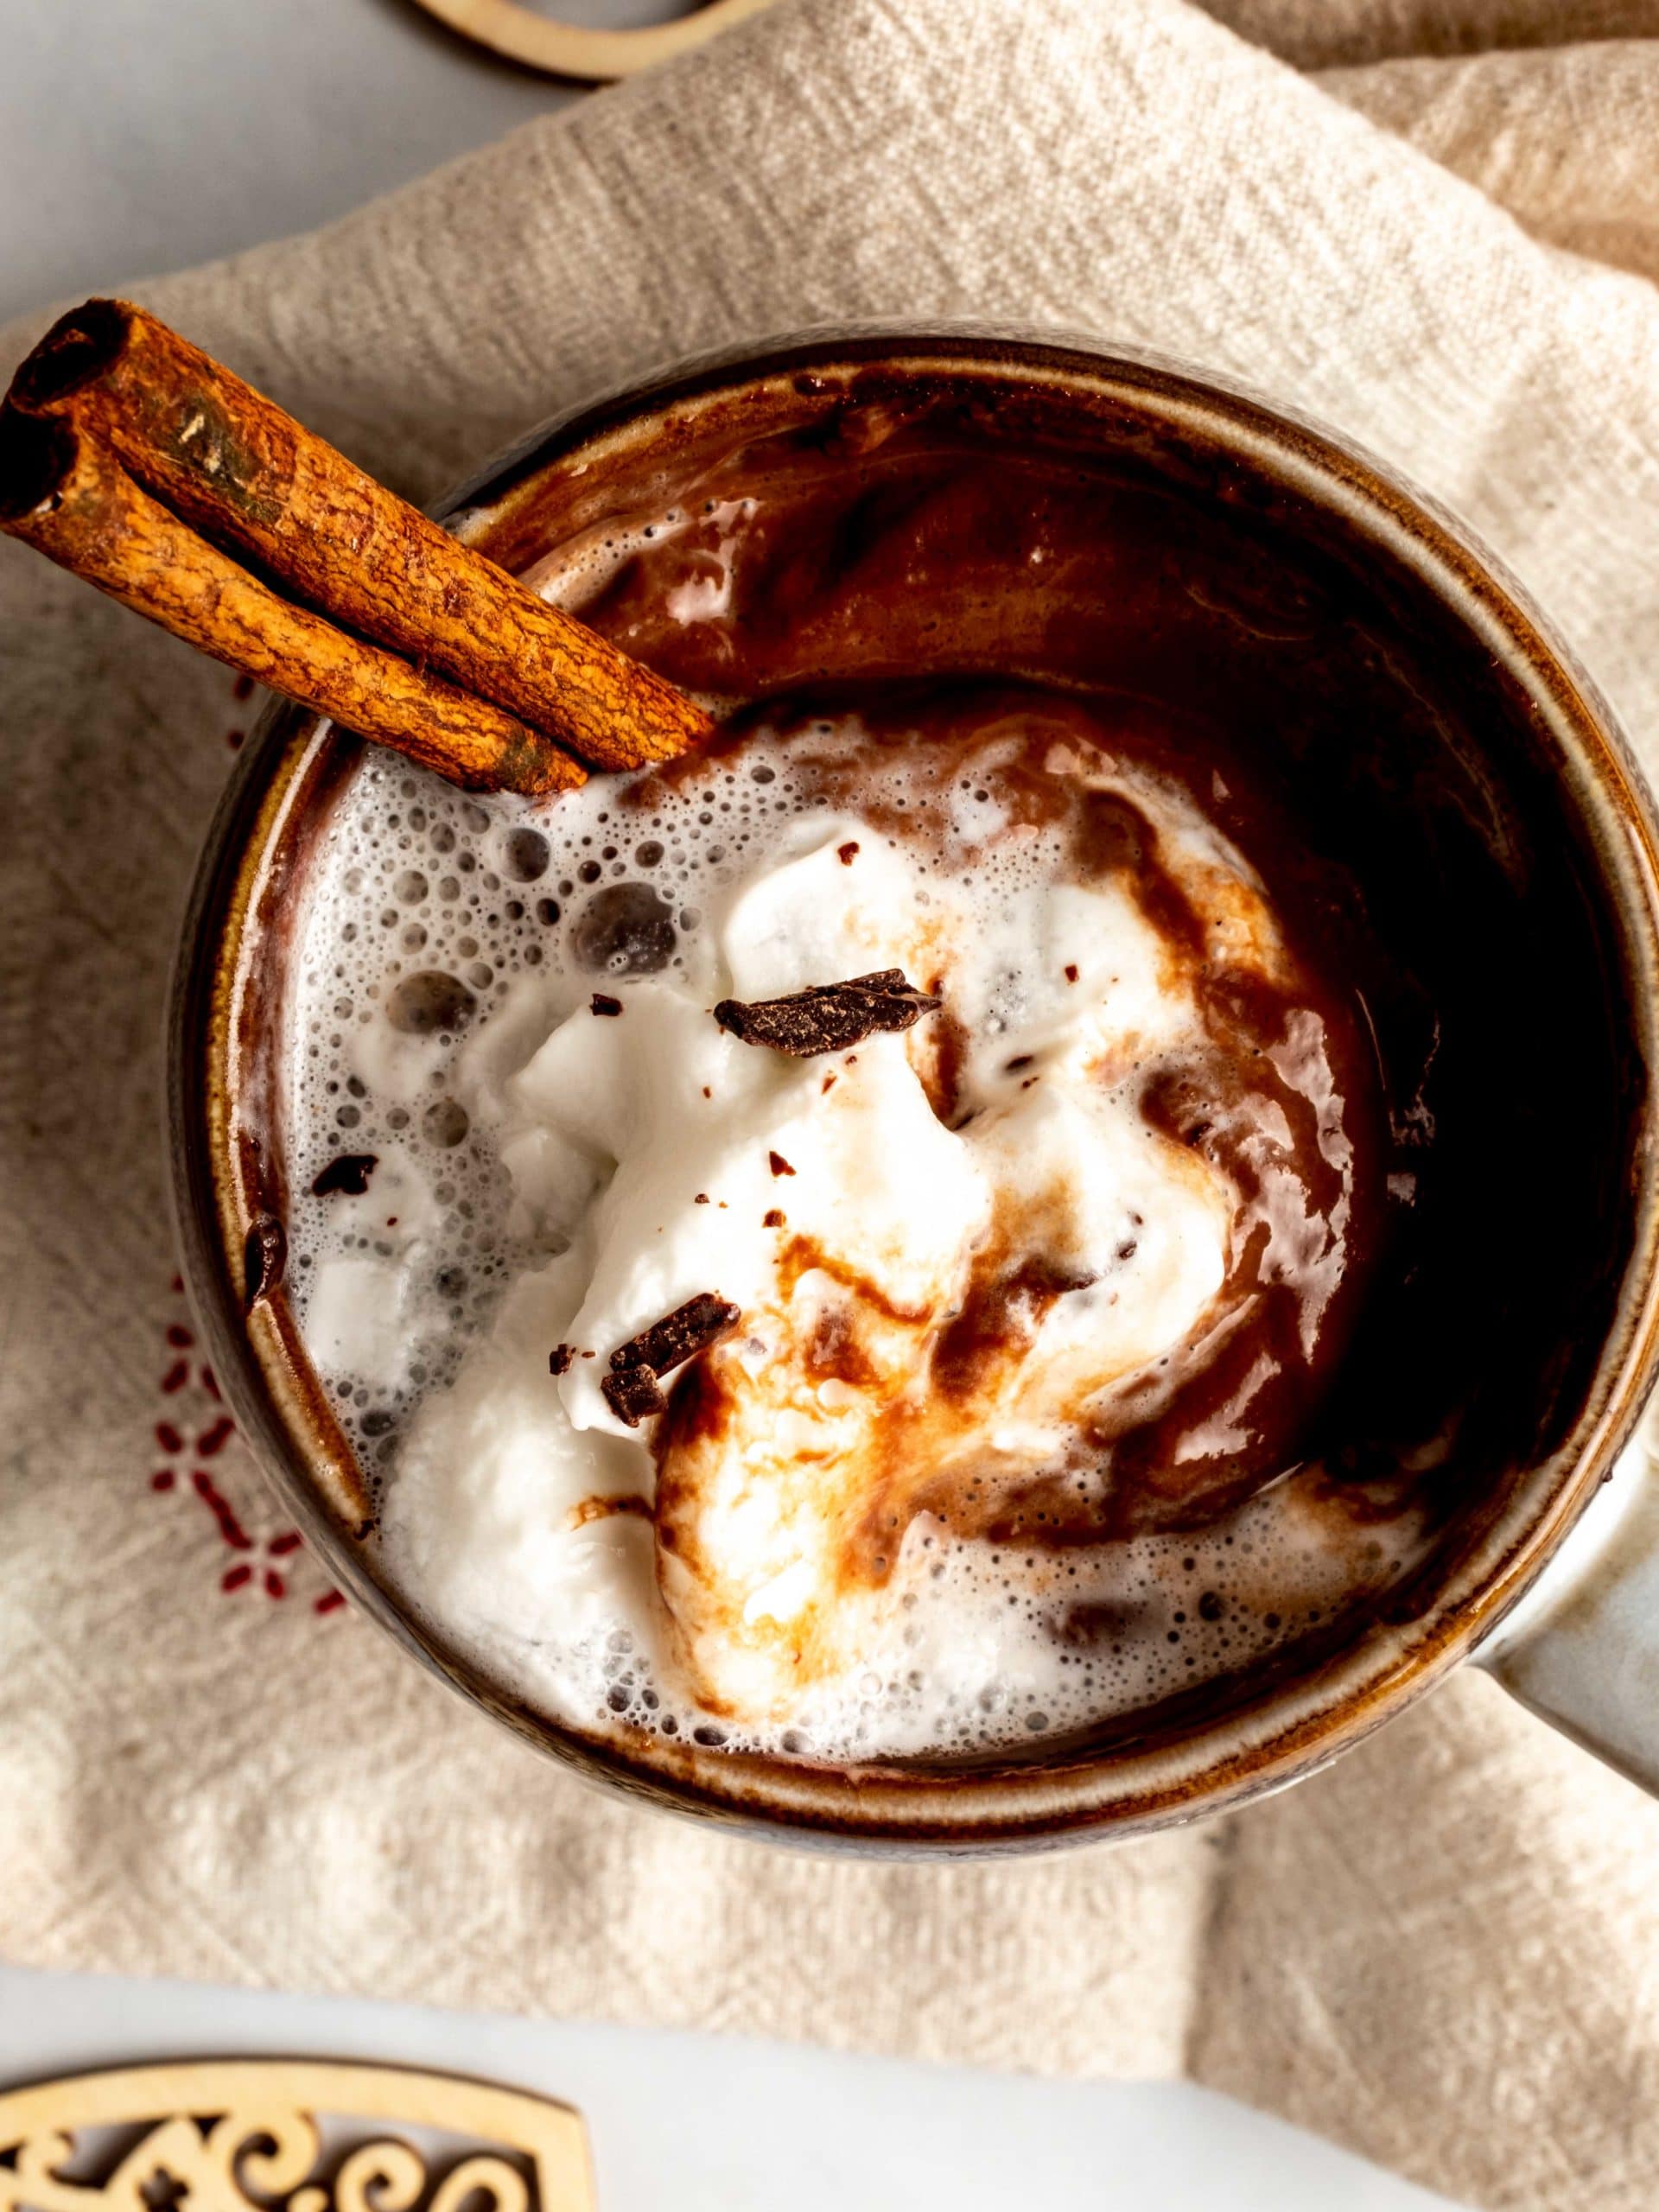 overhead view of espresso sipping chocolate with whipped cream and cinnamon stick